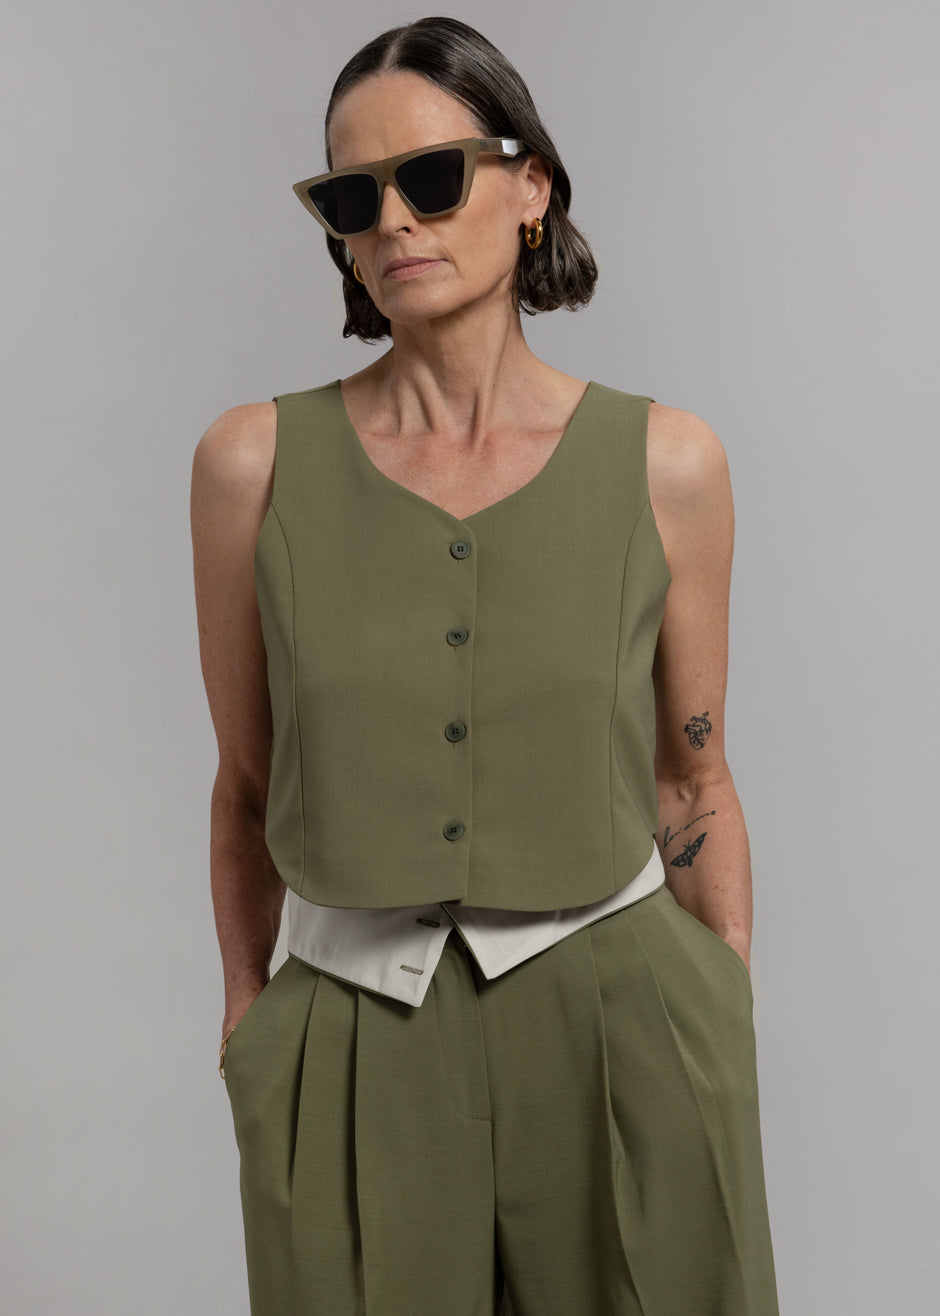 Holi Vest - Olive Beside You is available at a reasonable price ...